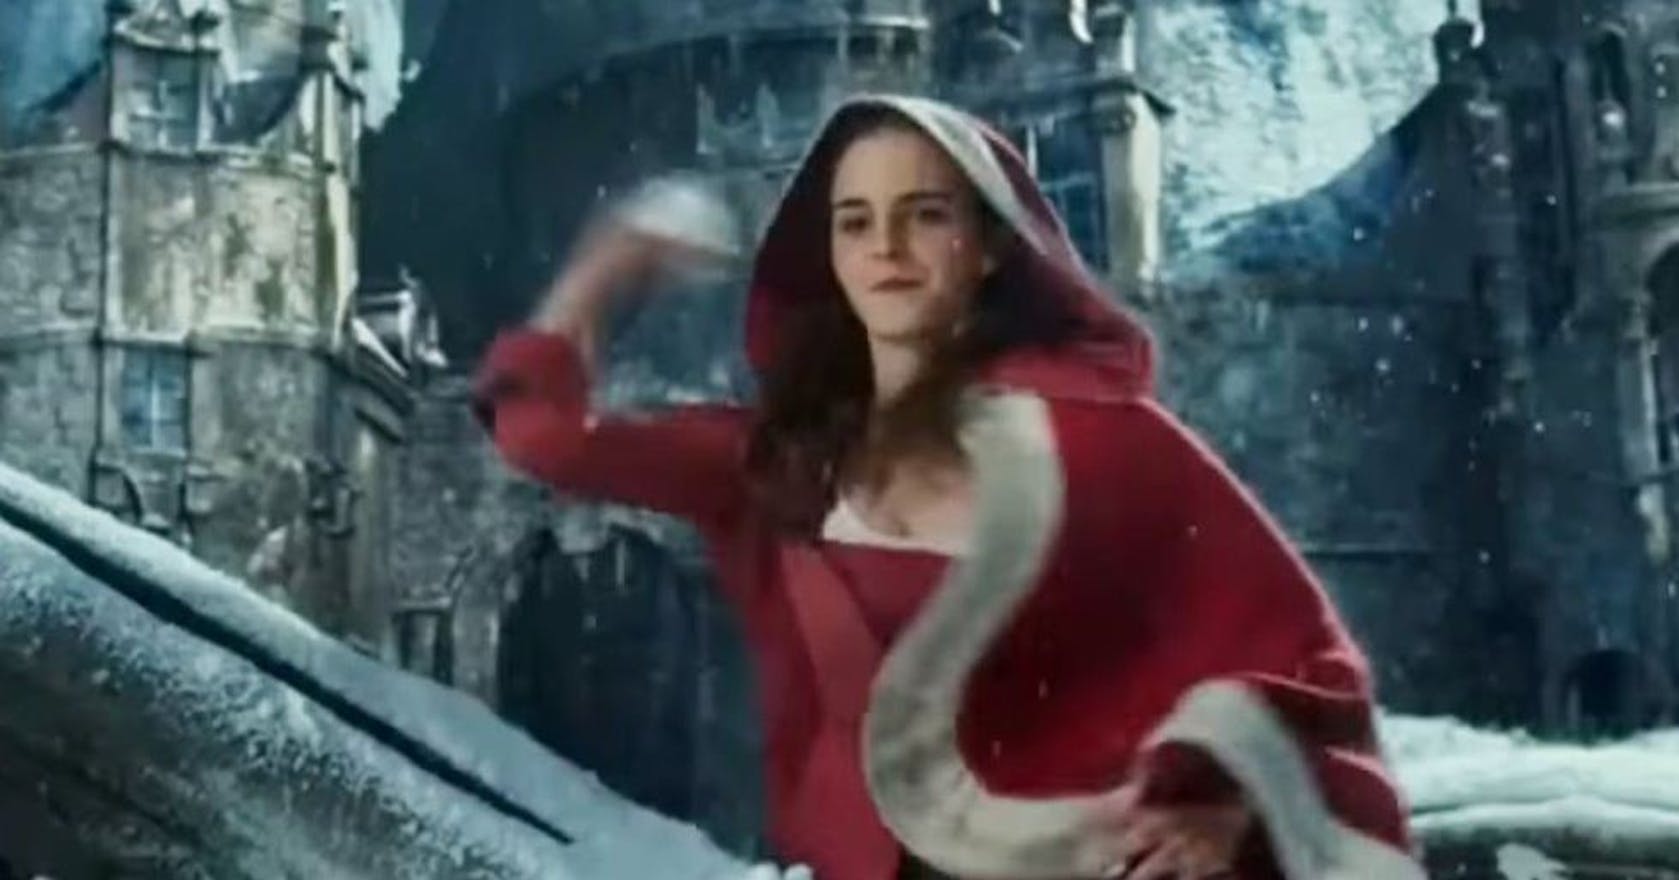 Watch brand-new footage from Disney’s Beauty and the Beast